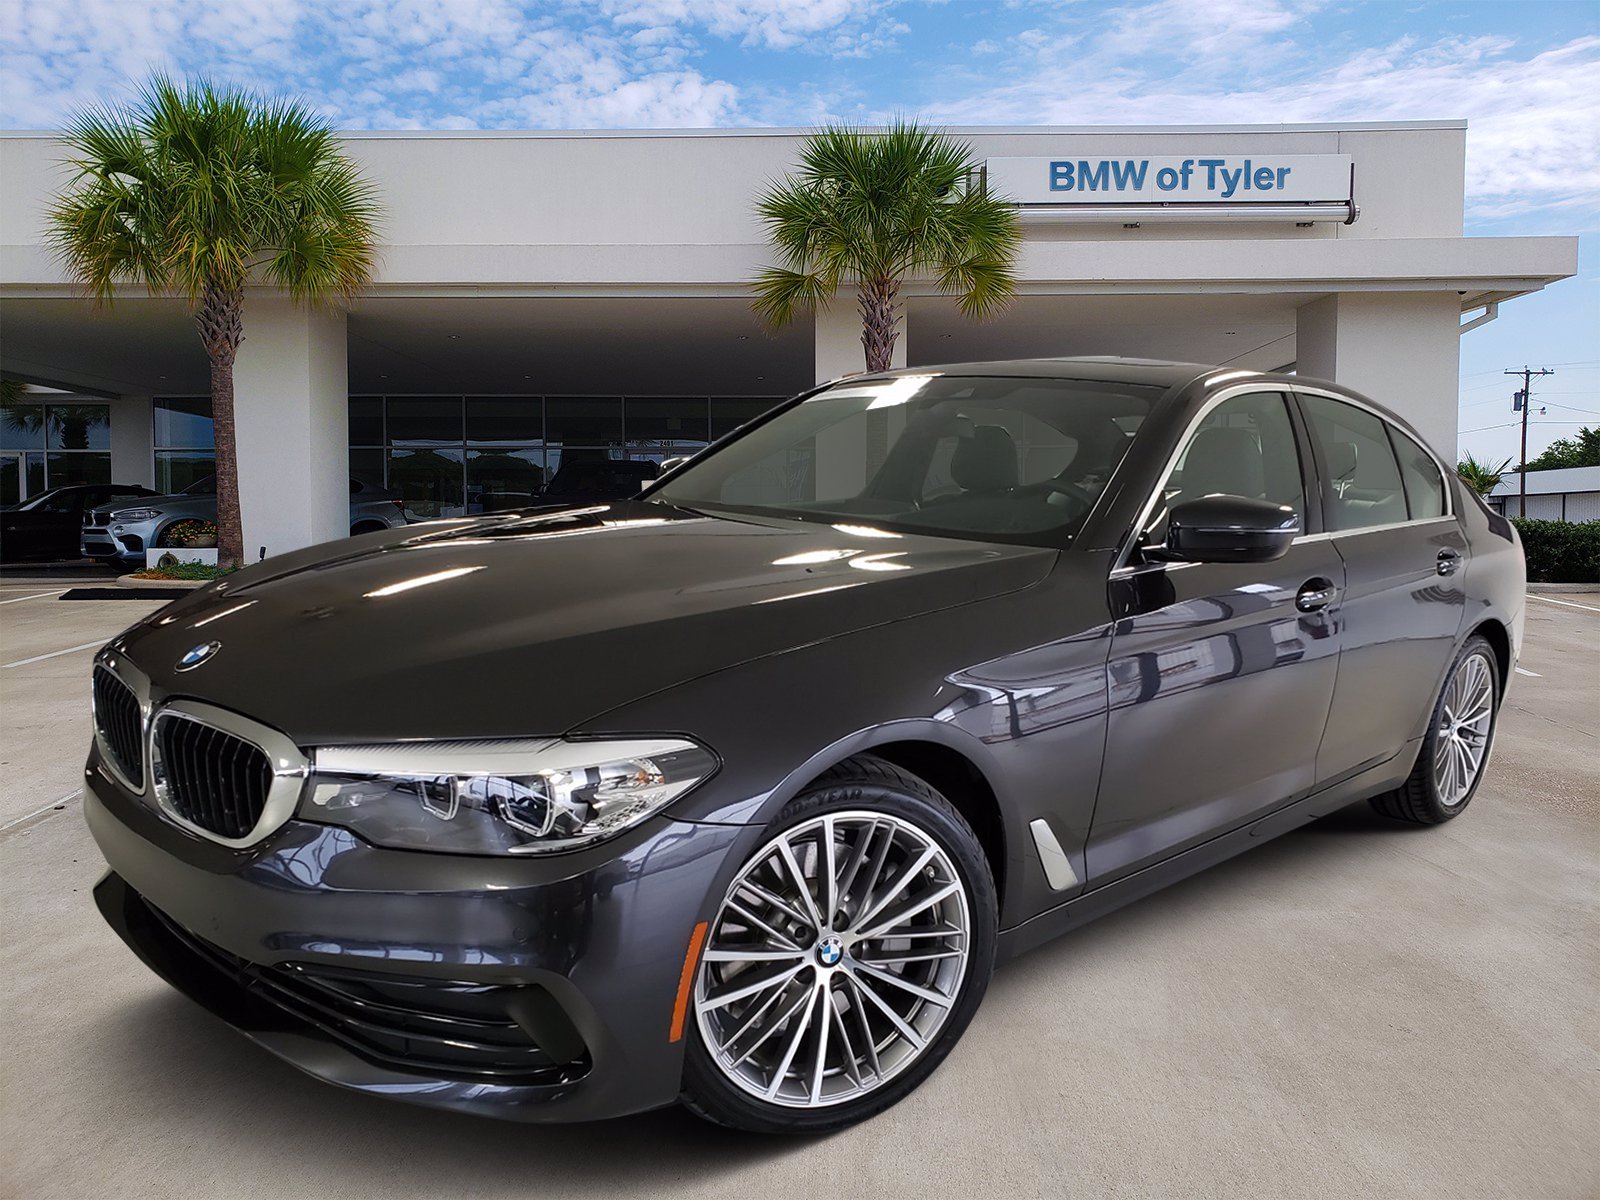 Pre-Owned 2019 BMW 5 Series 530i 4dr Car in Fayetteville #XW37707 ...